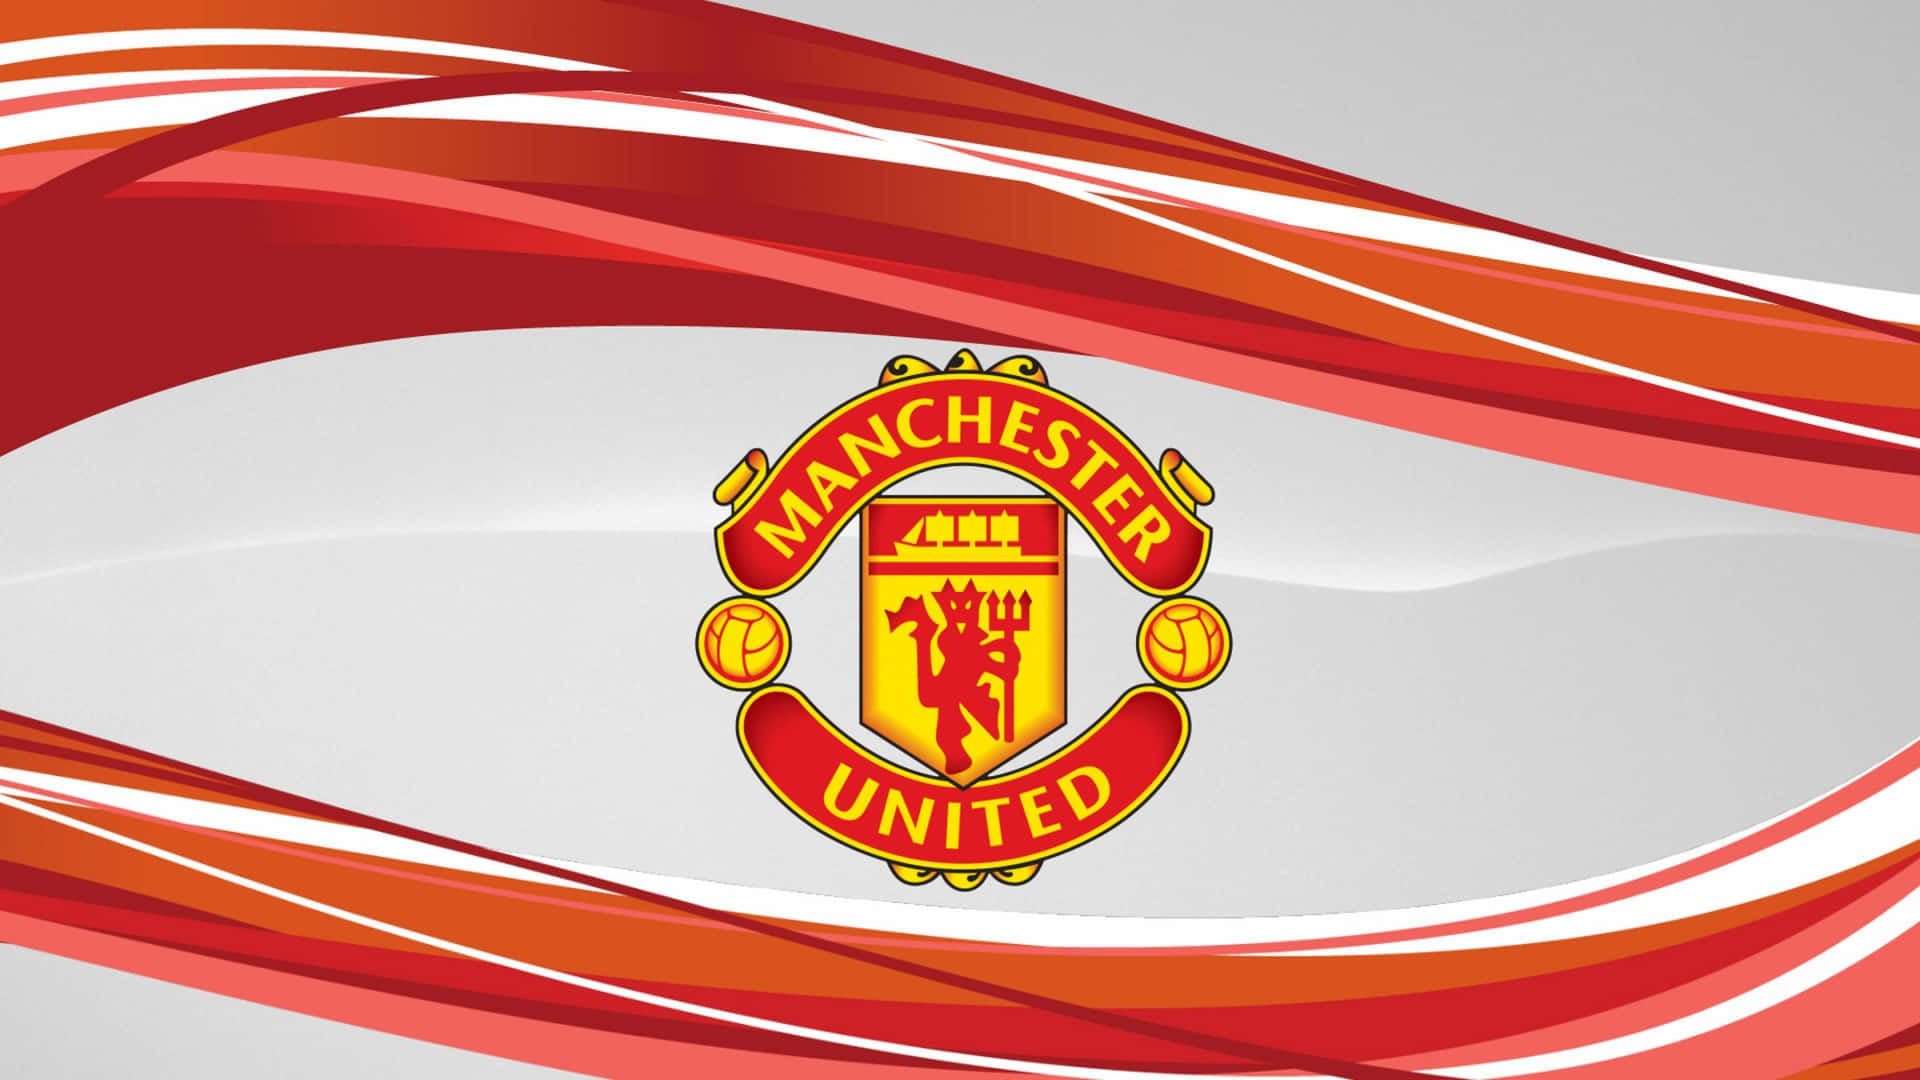 Red and Gold, United Forever